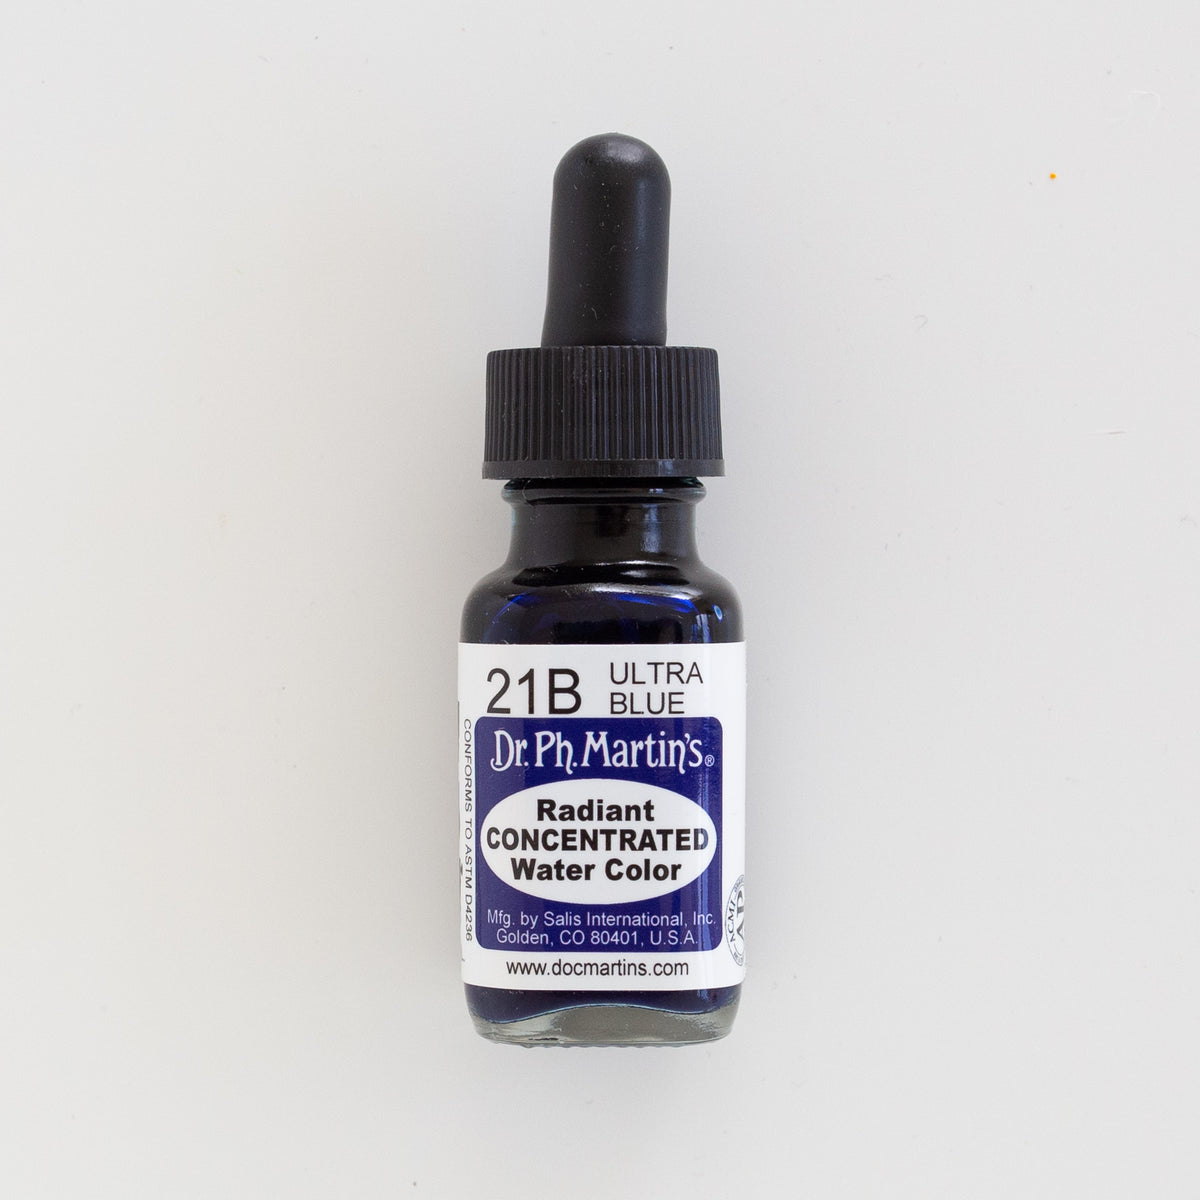 DR. Ph. Martin's Radiant Concentrated 21B Ultra Blue